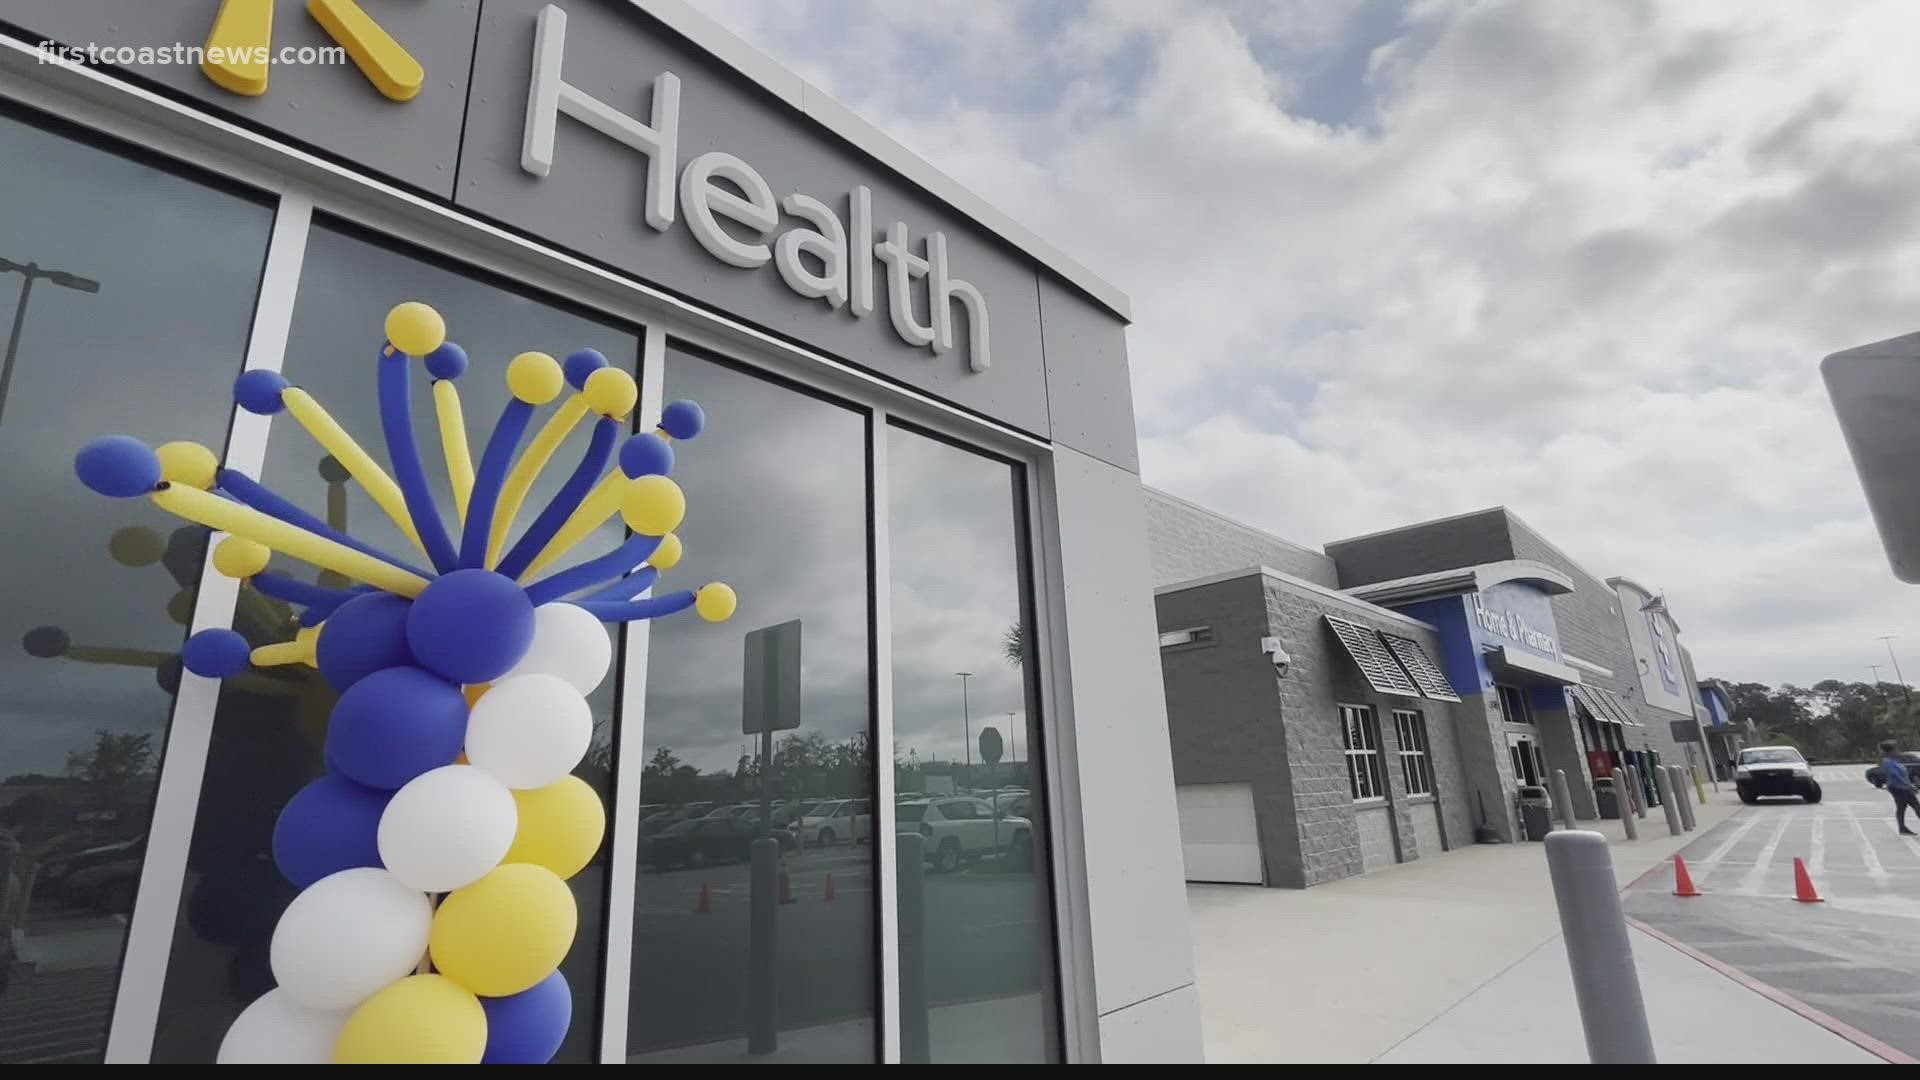 The new health center within Walmart will make it easier for you to get important health screenings done while you're out and about.